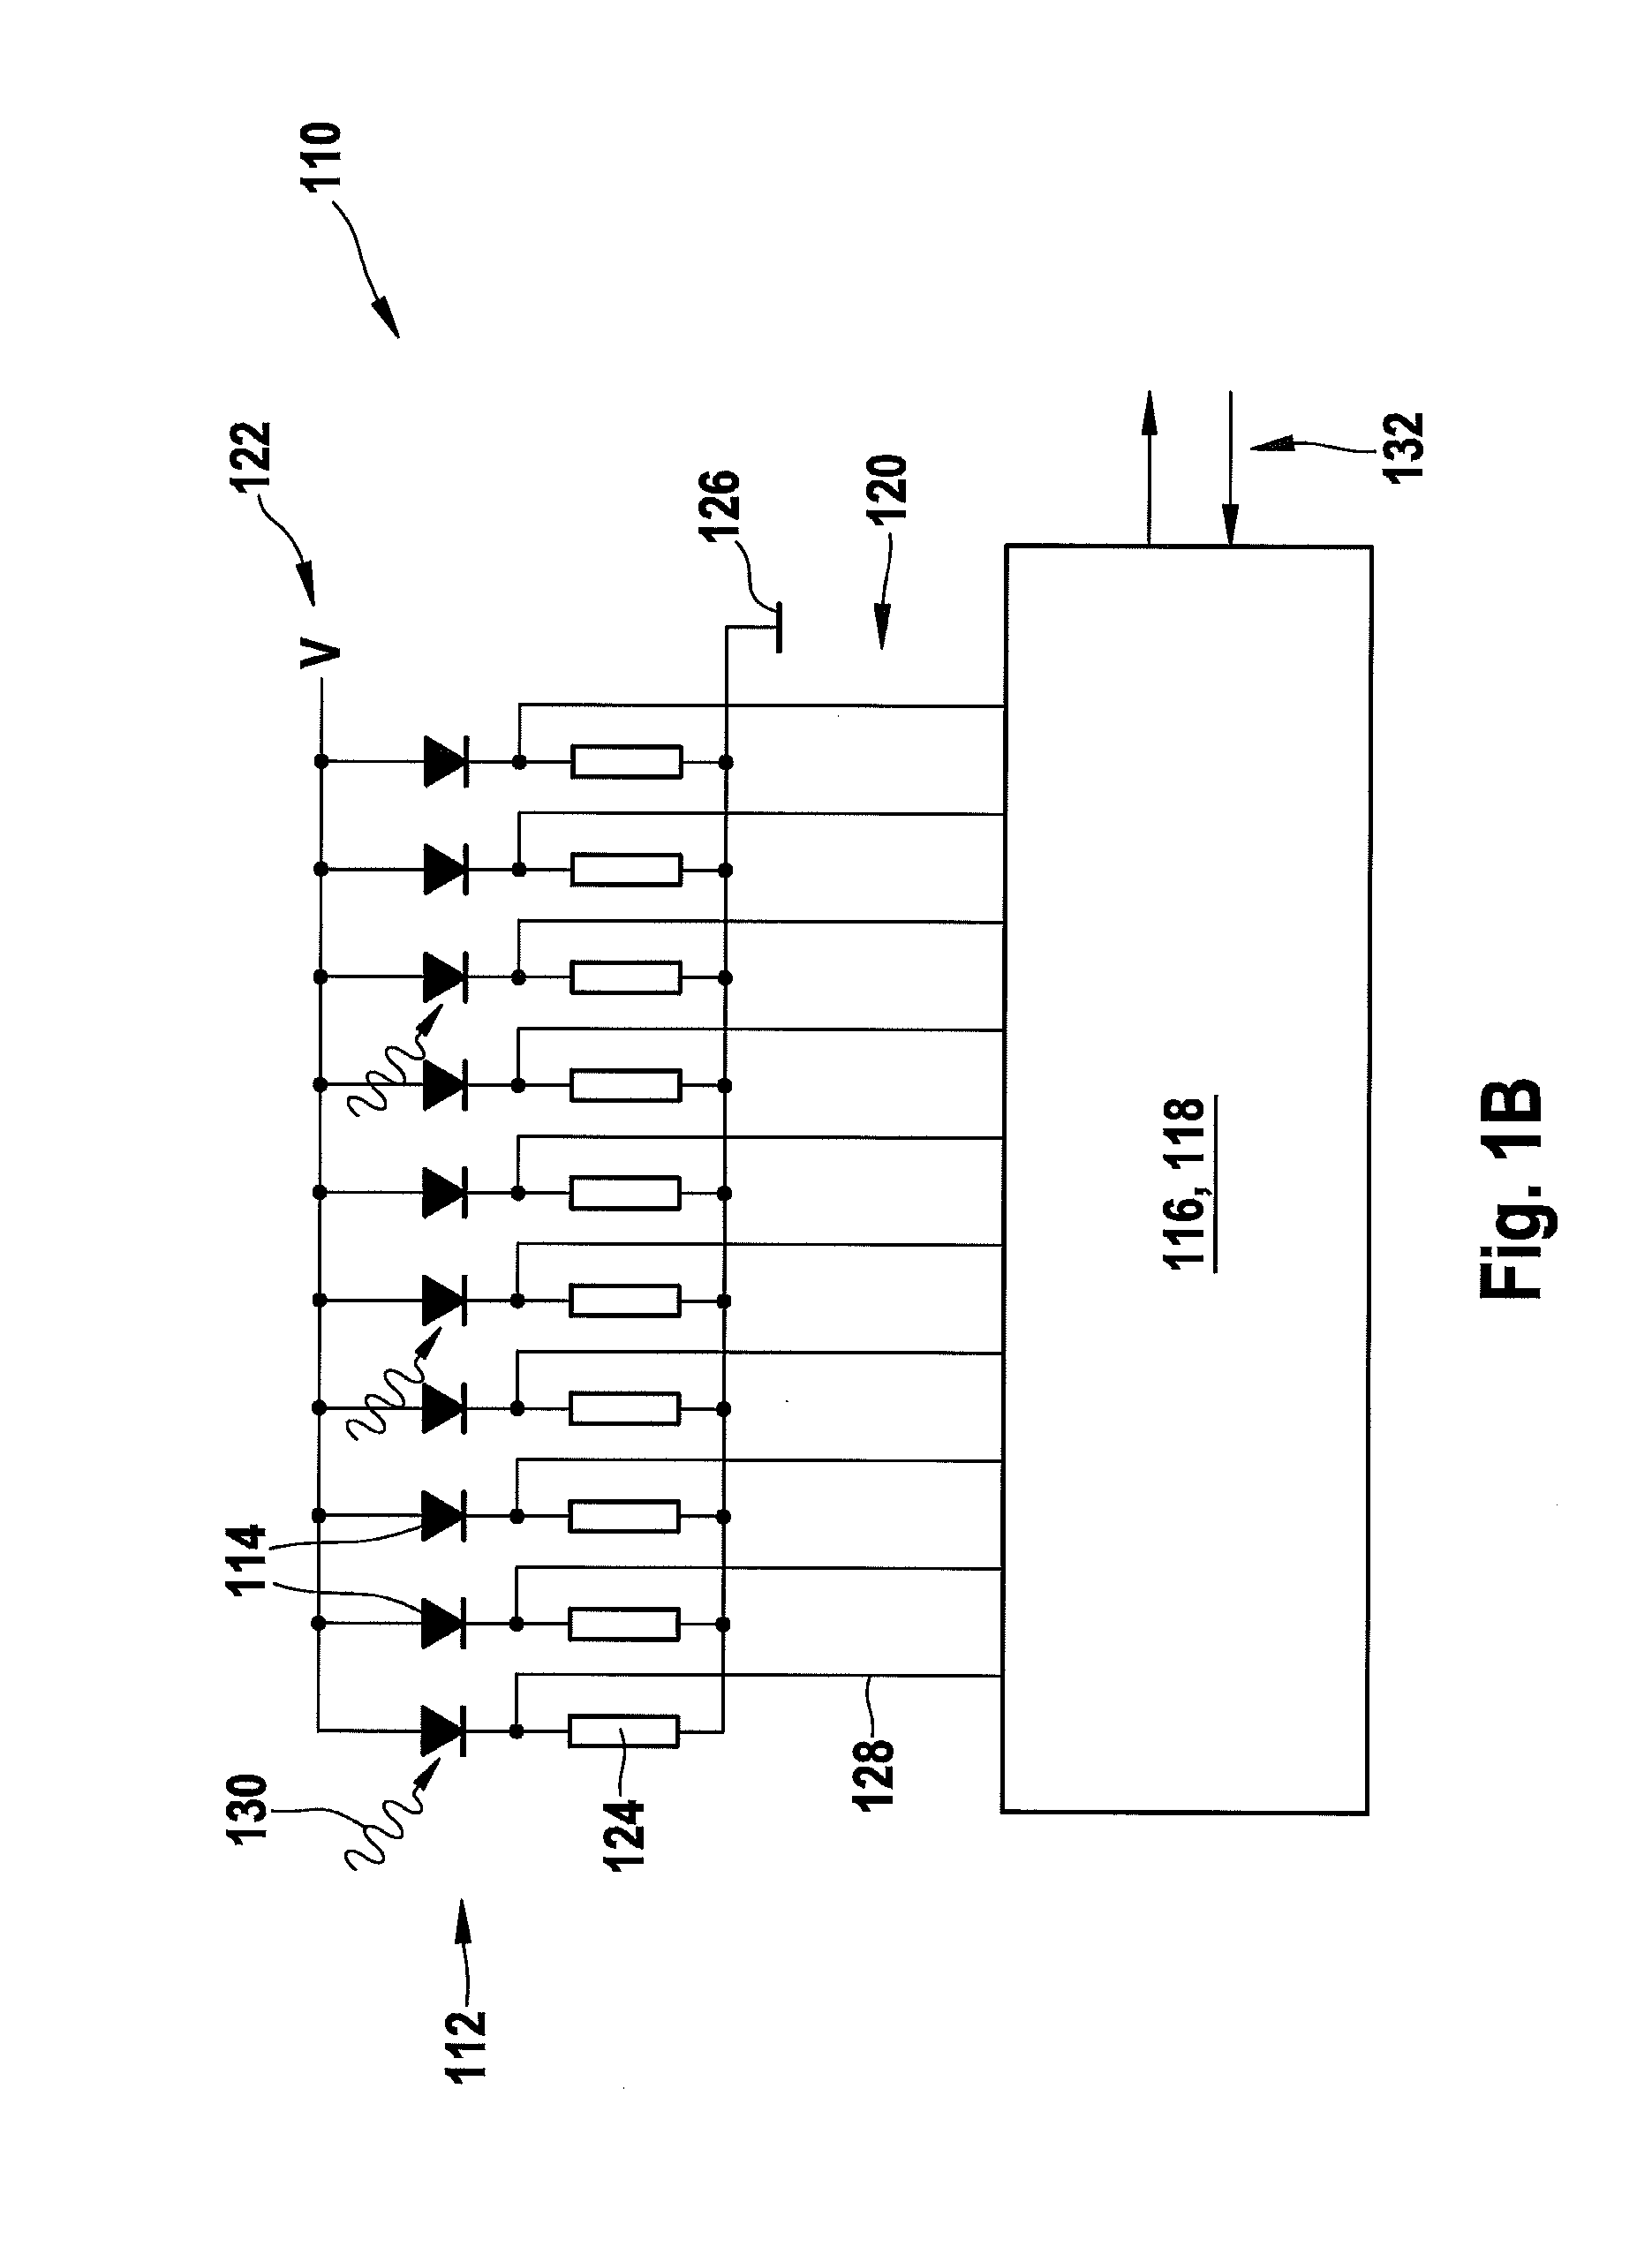 Apparatus for the detection of light in a scanning microscope